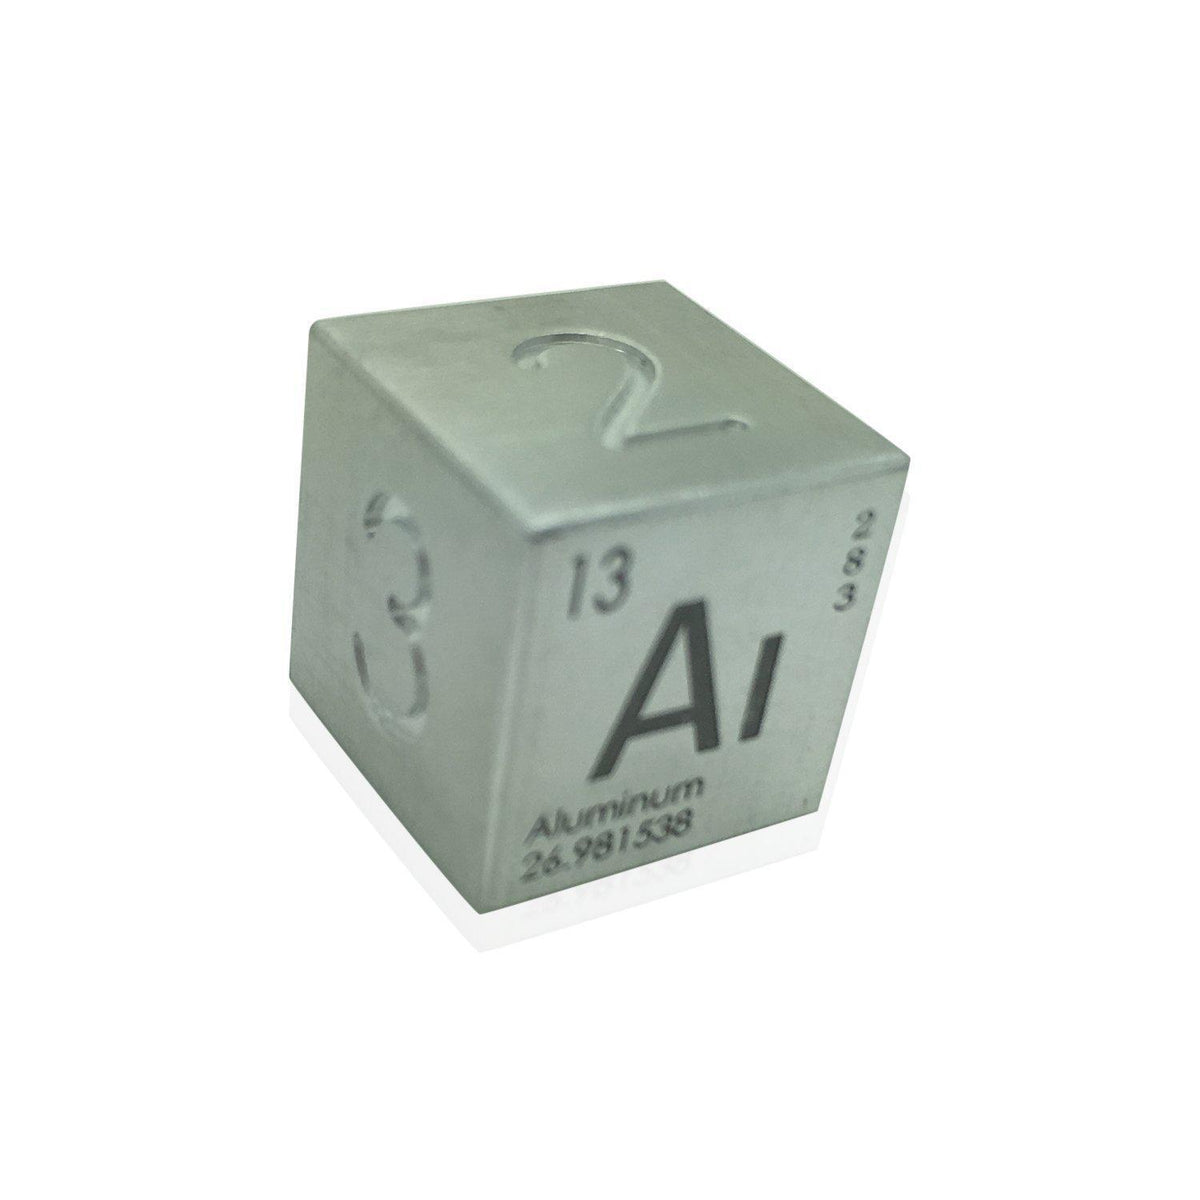 Single Alloy D6 in Aluminum by Norse Foundry-Dice-Norse Foundry-DND Dice-Polyhedral Dice-D20-Metal Dice-Precision Dice-Luxury Dice-Dungeons and Dragons-D&amp;D-